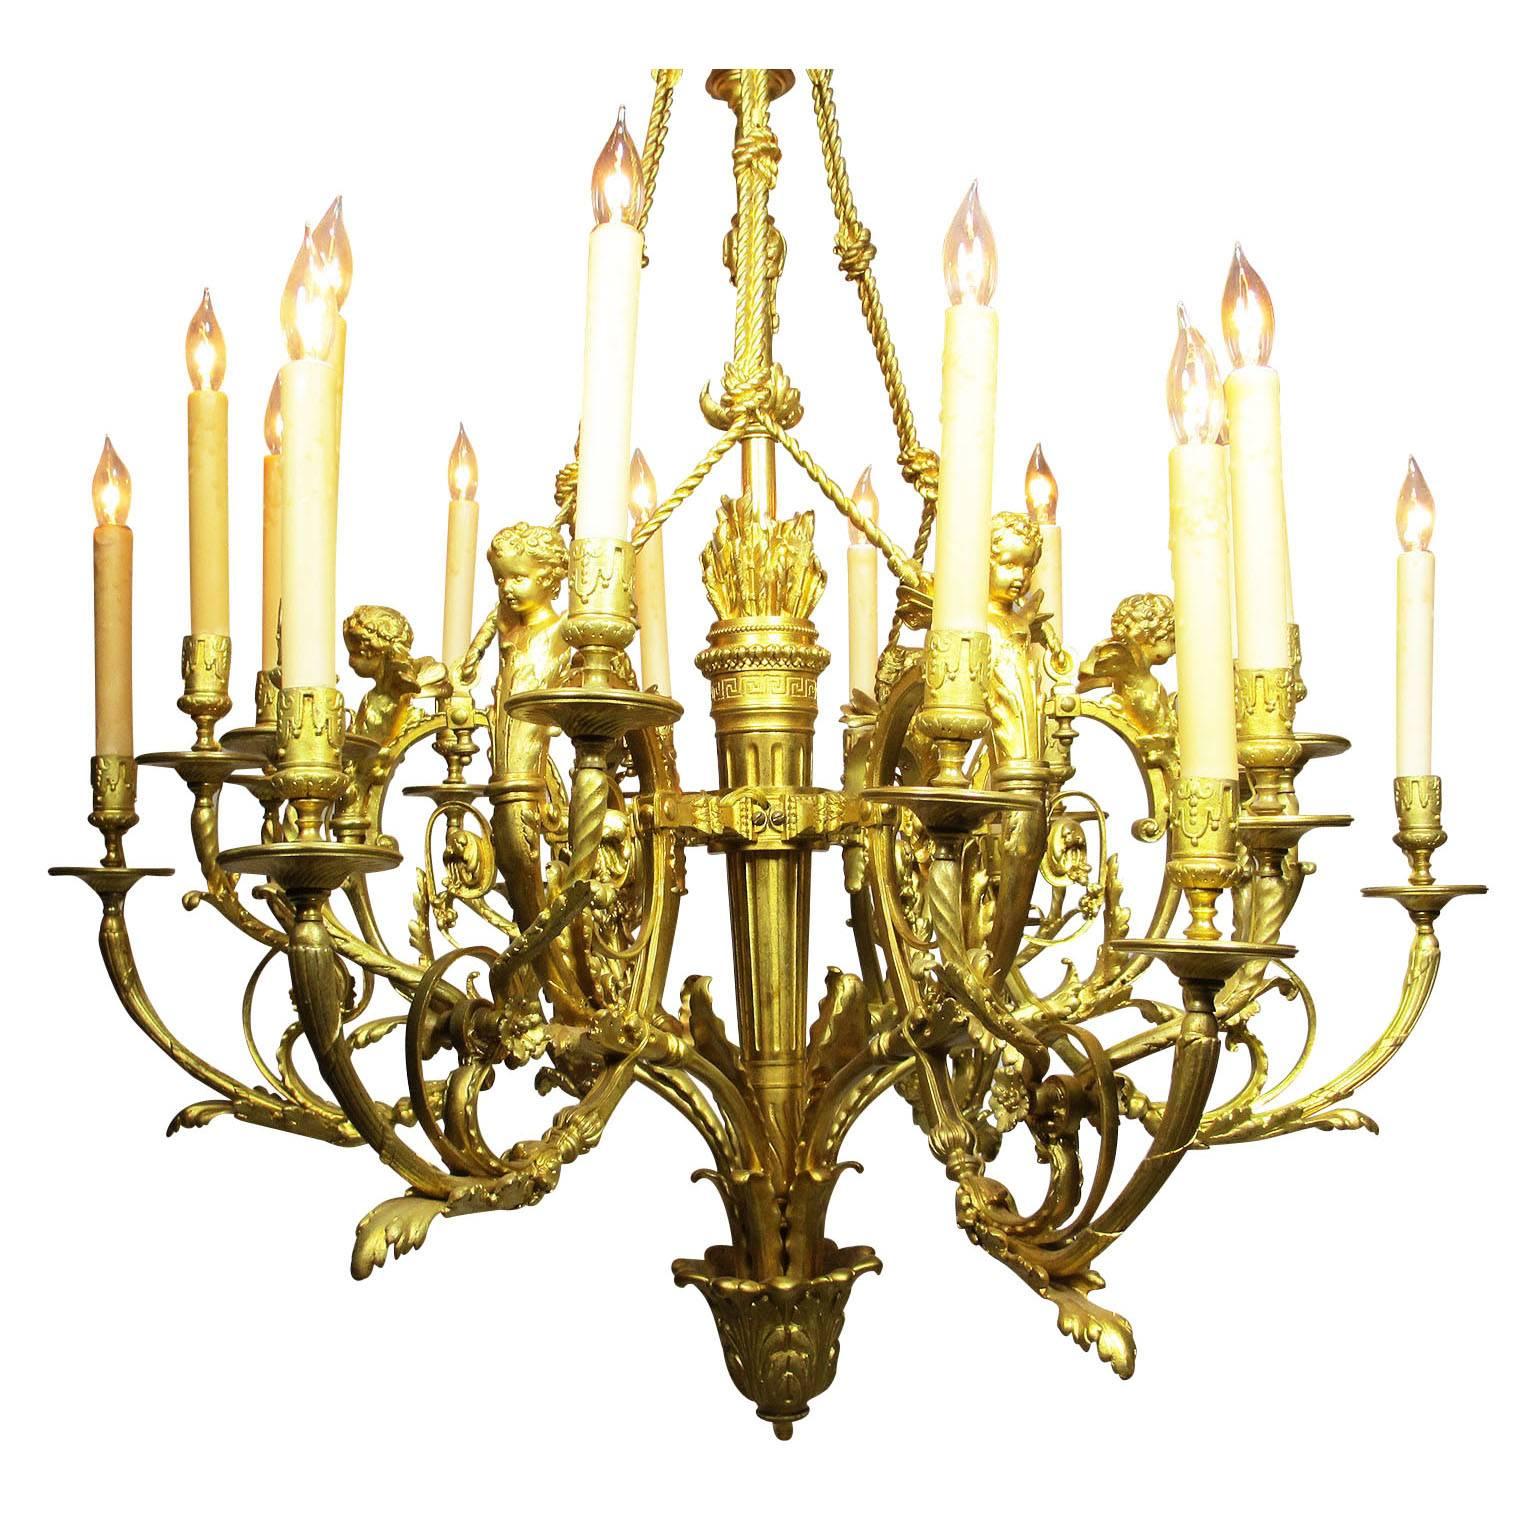 A fine French Belle Époque 19th-20th century eighteen-Light gilt bronze and alloys  figural chandelier. The scrolled acanthus corona suspending a rope-hung quiver, supporting six winged putto (Cherubs) terms each issuing three scrolled foliate